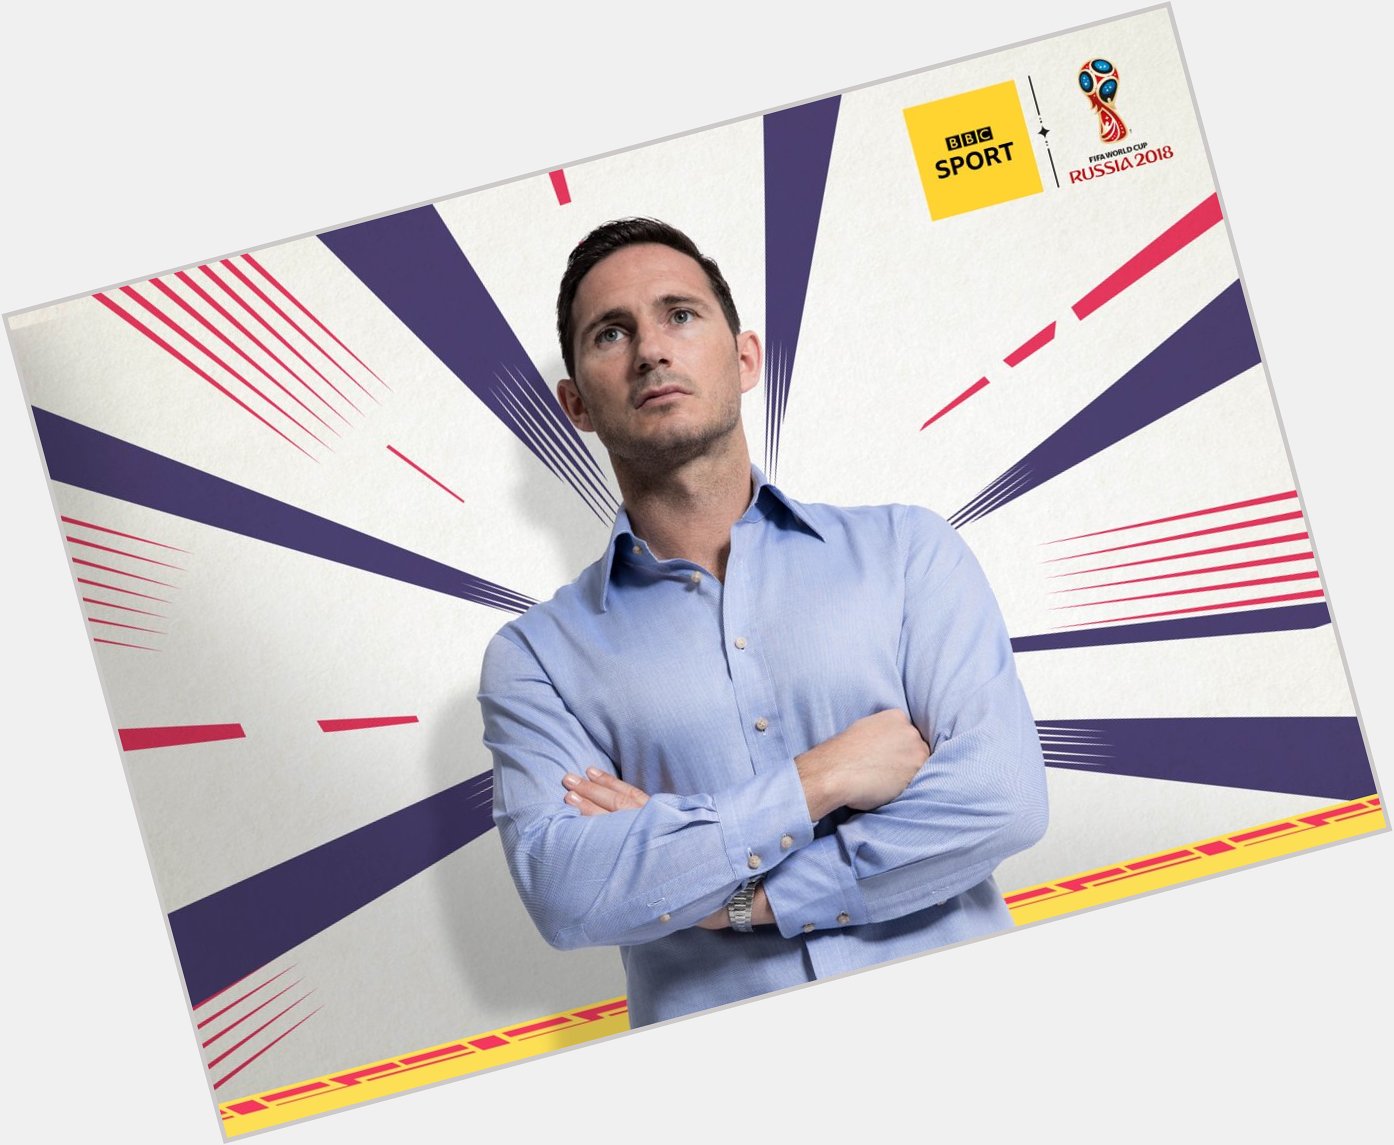 An incredible player...

And he can strike a good pose too! Happy birthday, Frank Lampard! 